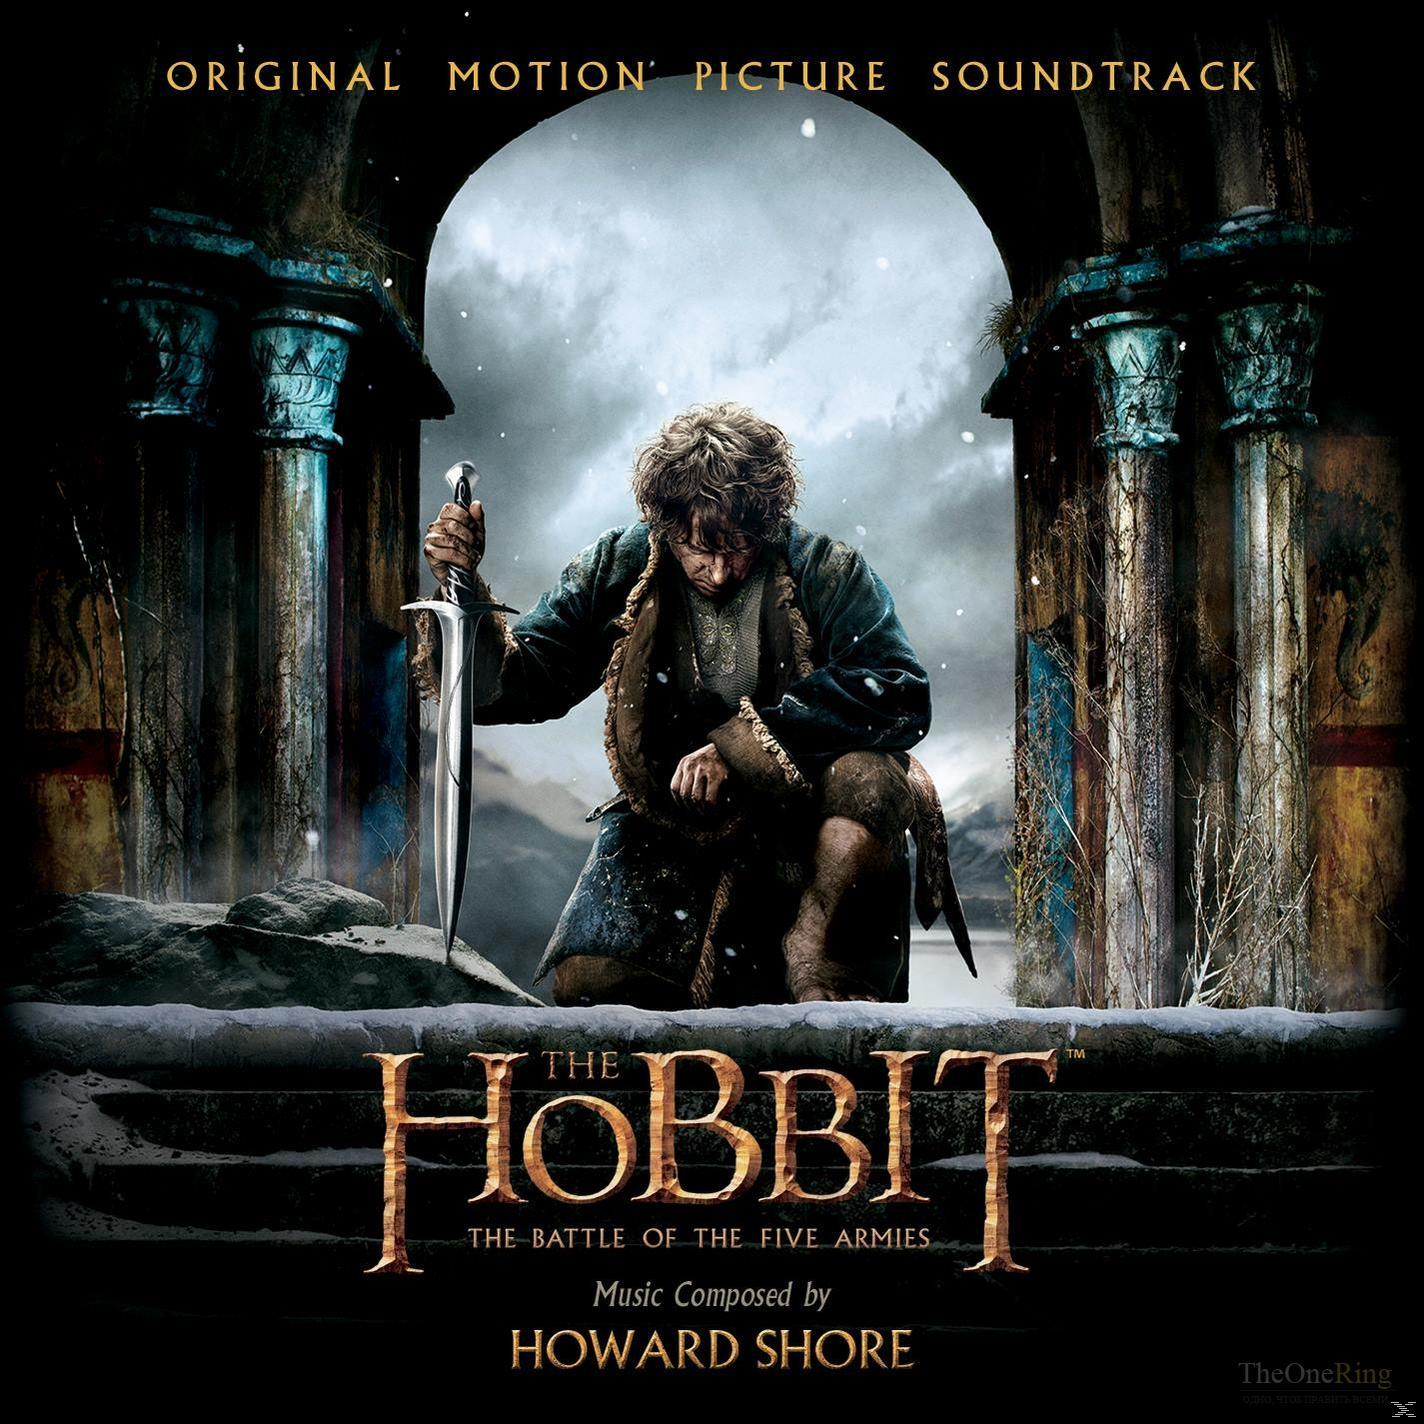 Howard Shore - The Hobbit: Of The (CD) - The Battle Armies Five